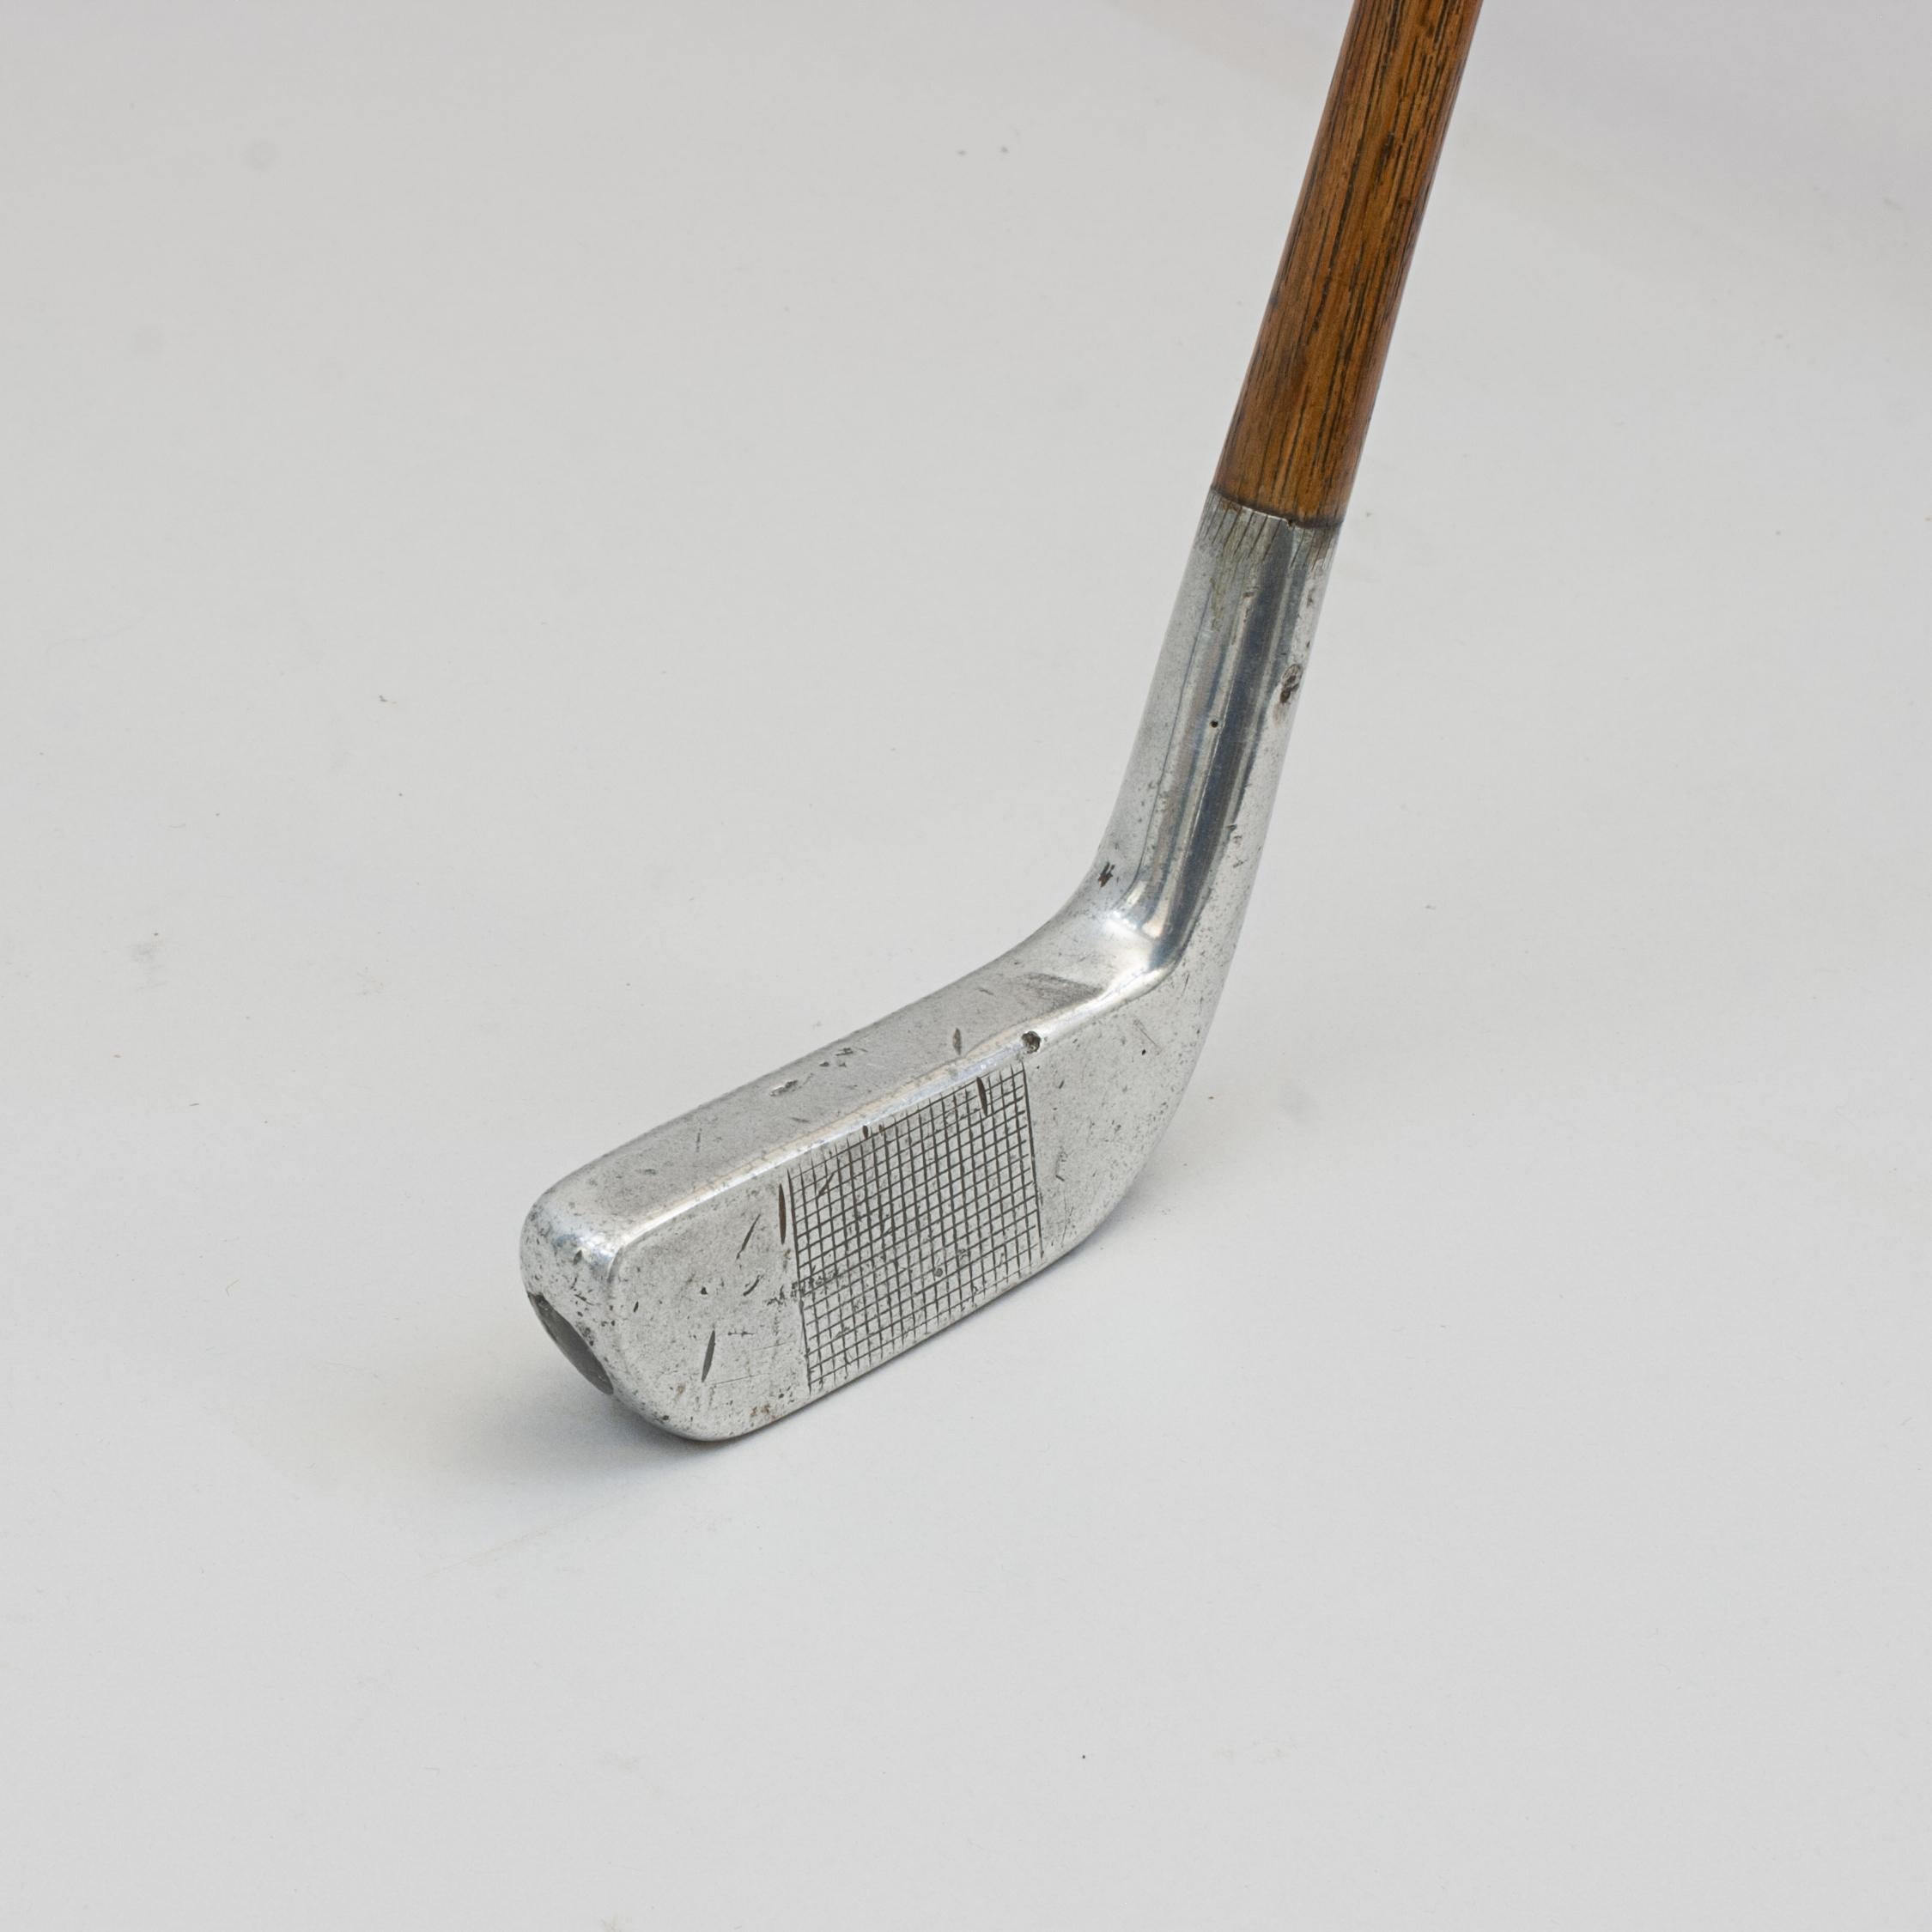 Vintage Aluminium Right-handed putter.
An unusual vintage aluminium putter made by the Imperial Golf Company, Southwick, Sunderland. The golf club face with square mesh pattern, the shaft made of hickory which continues through the hosel with the